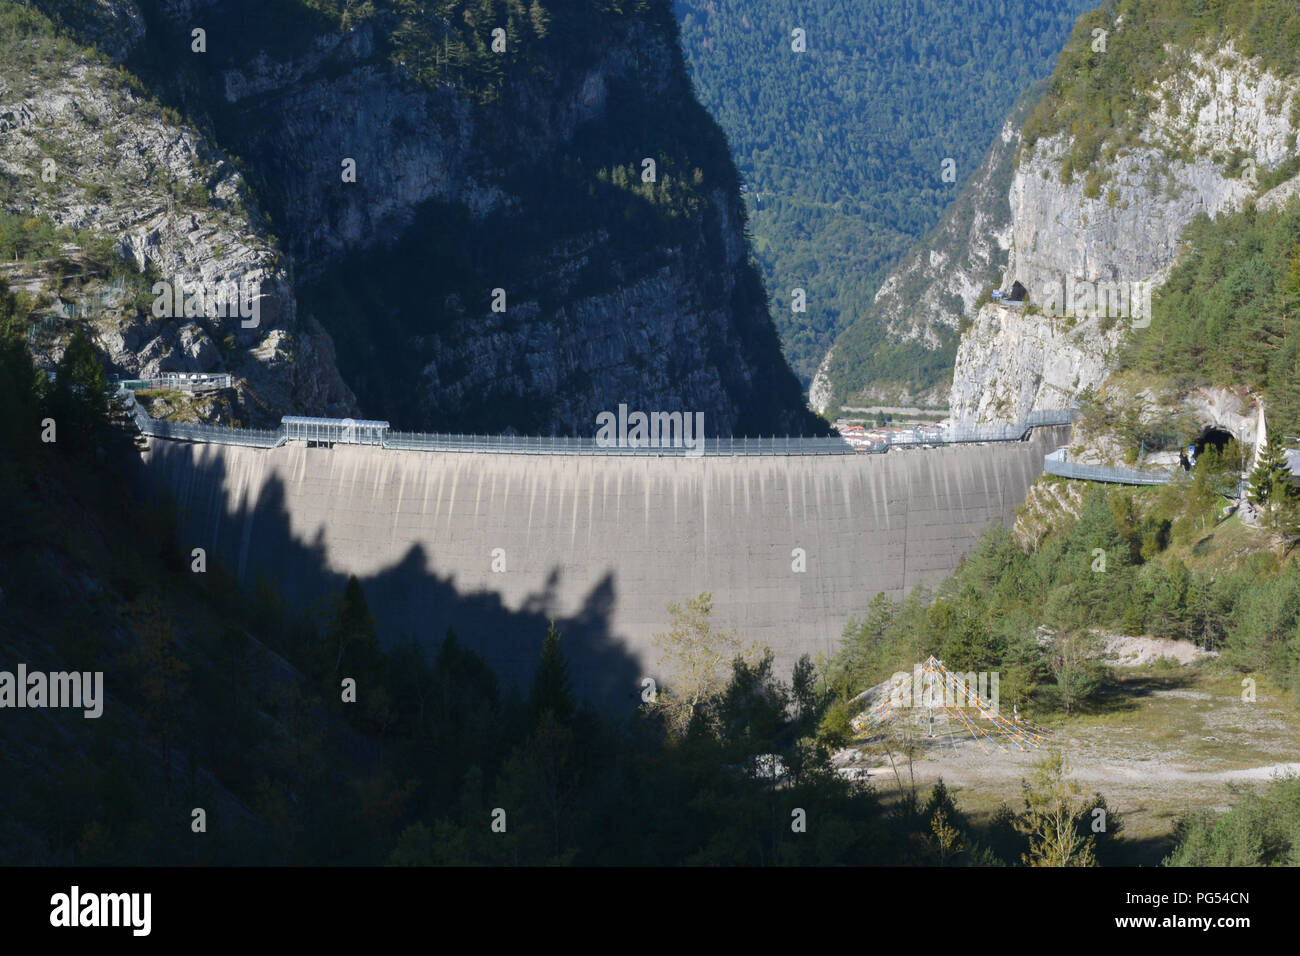 the Vajont dam in the Vajont Valley, famous for the great tragedy of 9 October 1963 that caused over 2000 victims in the province of Belluno Stock Photo